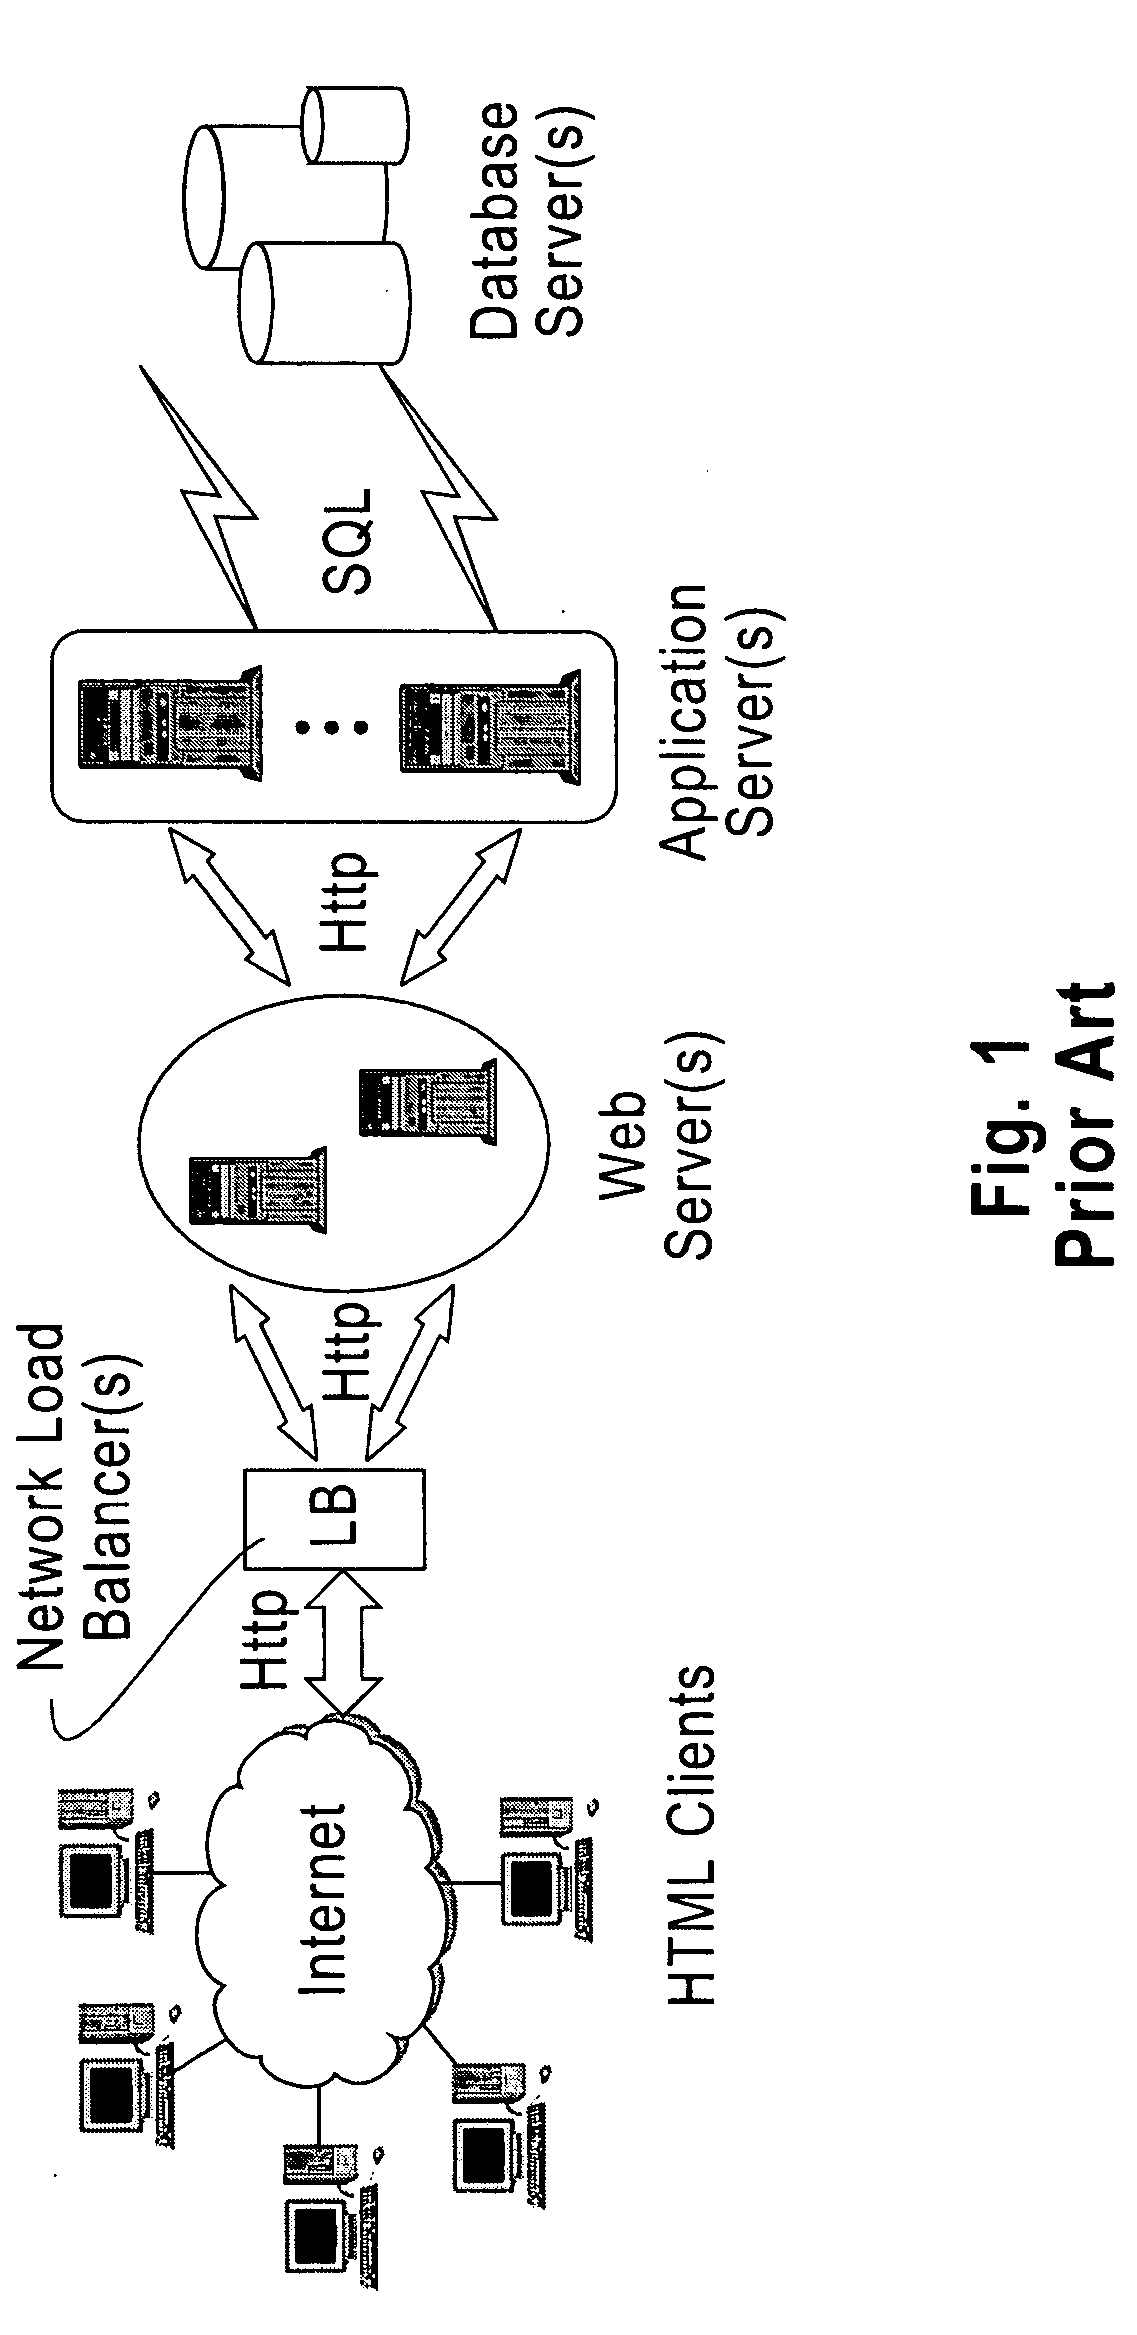 System and method for adaptive database caching